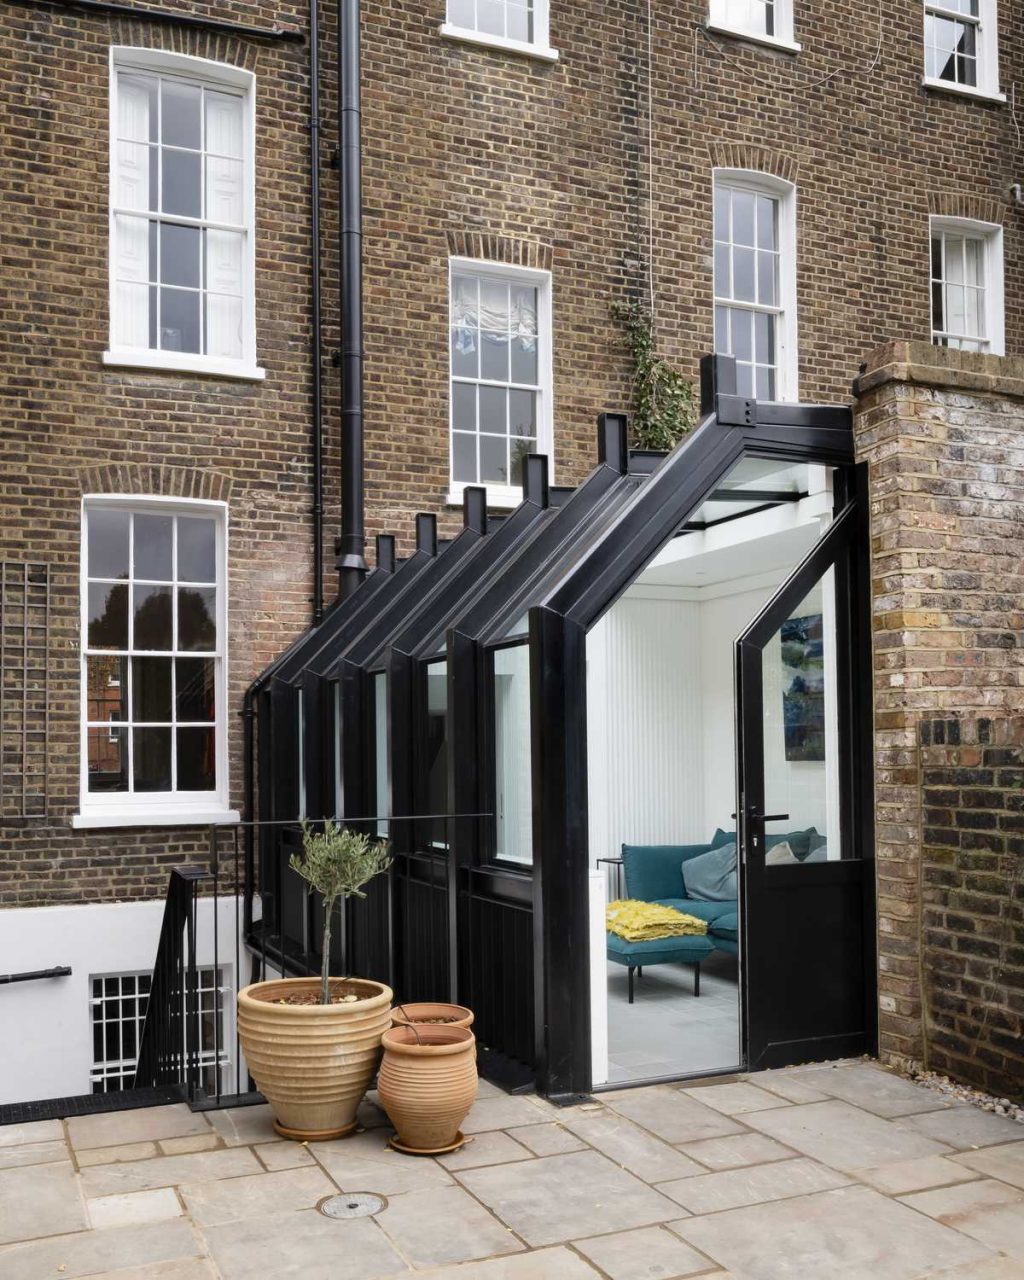 A glasshouse re-connects a Listed townhouse to its garden